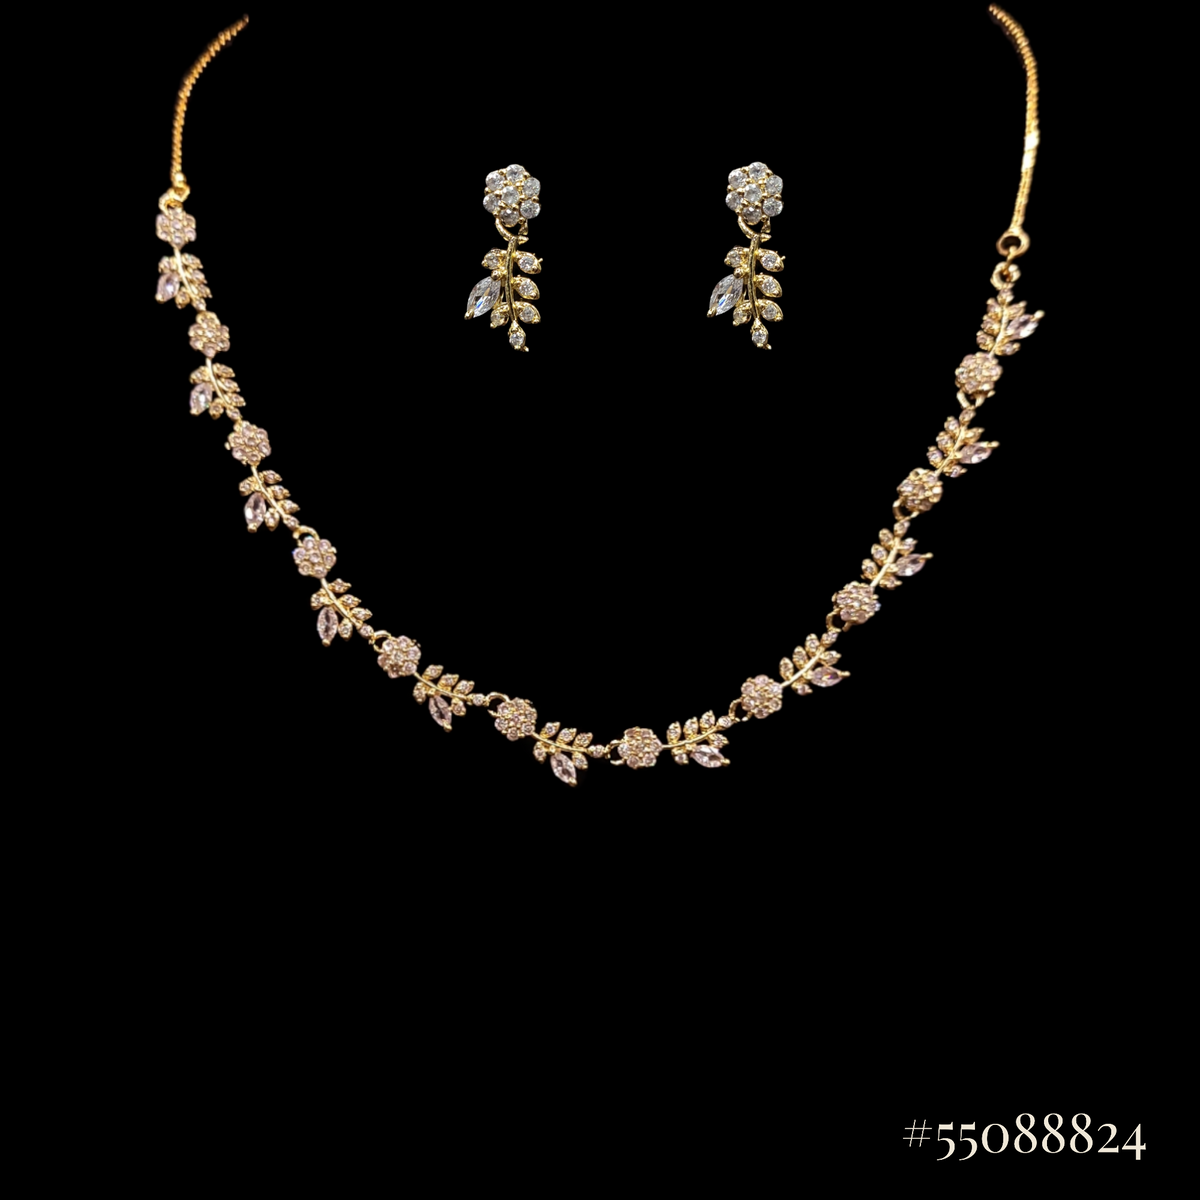 PRECIOUS FLOWER DIAMOND GOLD TONE NECKLACE WITH EARRINGS SET